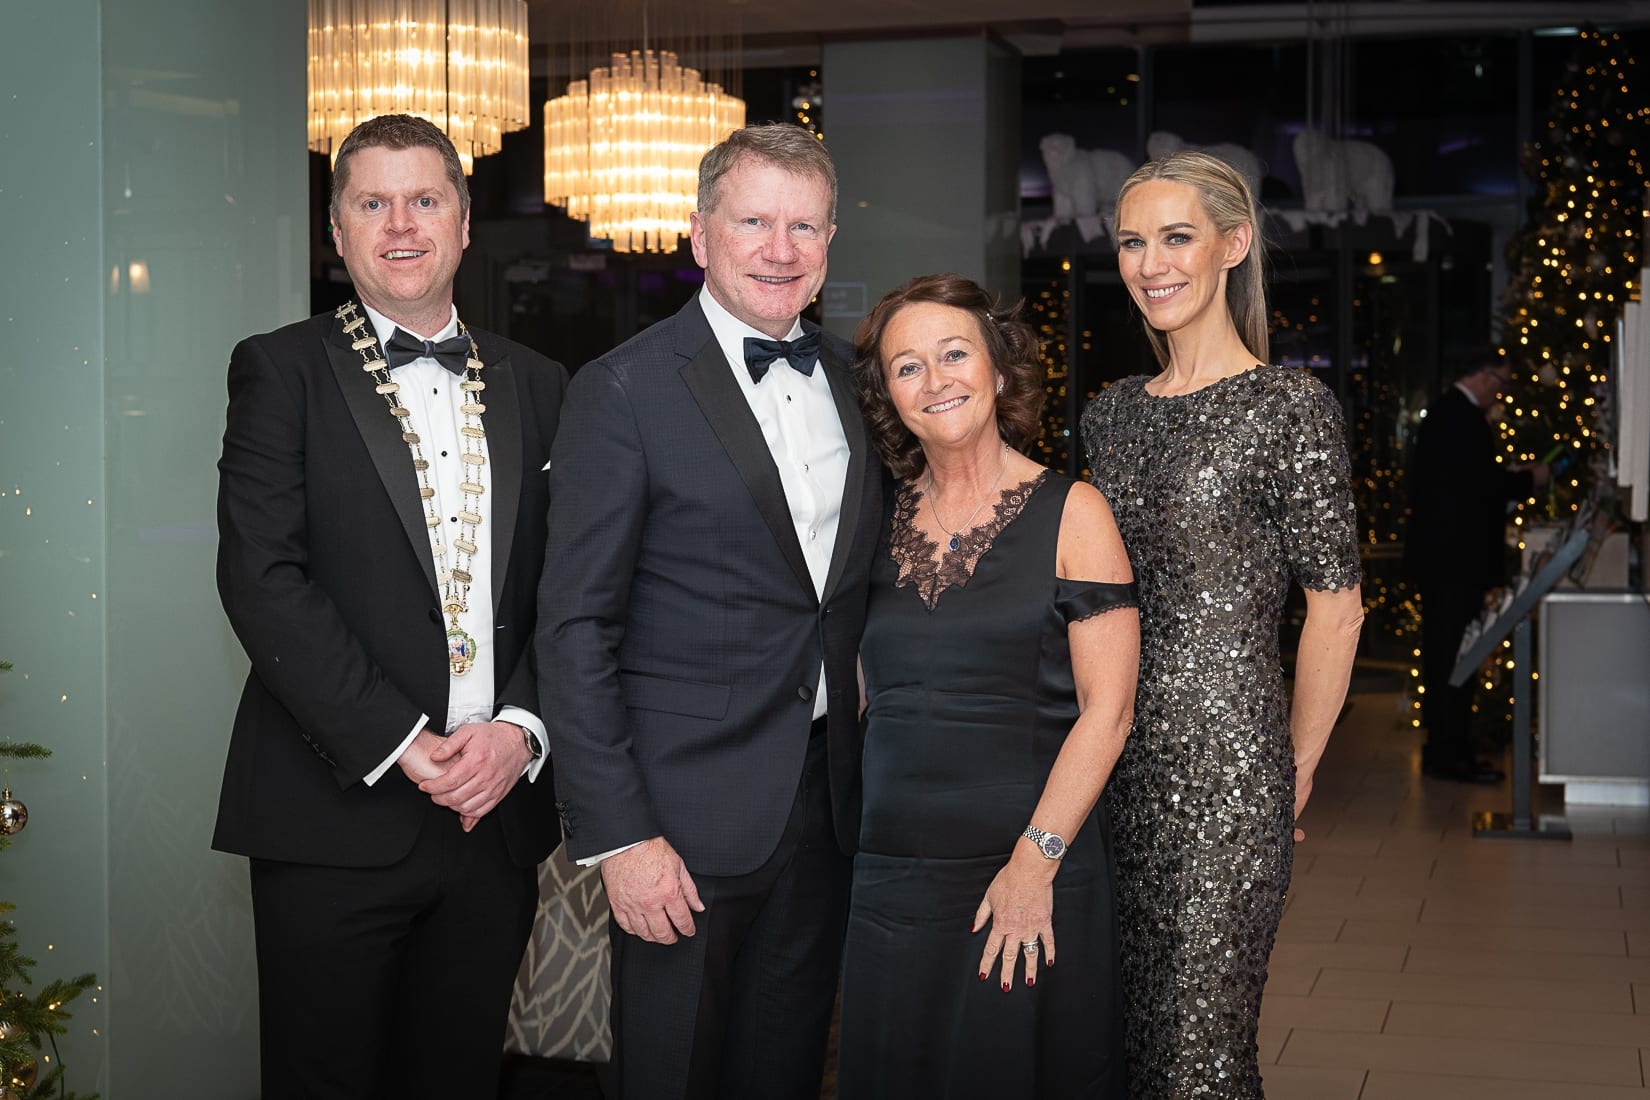 No repro fee-Limerick Chamber President’s Dinner
and Limerick Chamber Regional Business Awards 2019 which was held in the Strand Hotel on Friday 15th November /President Award/  - From Left to Right: Eoin Ryan - President Limerick Chamber, Dr Hugh O’Donnell - WINNER / Ingenium Training and Consultancy, Fionnola O’Donnell, Dee Ryan - CEO Limerick Chamber, 
Photo credit Shauna Kennedy